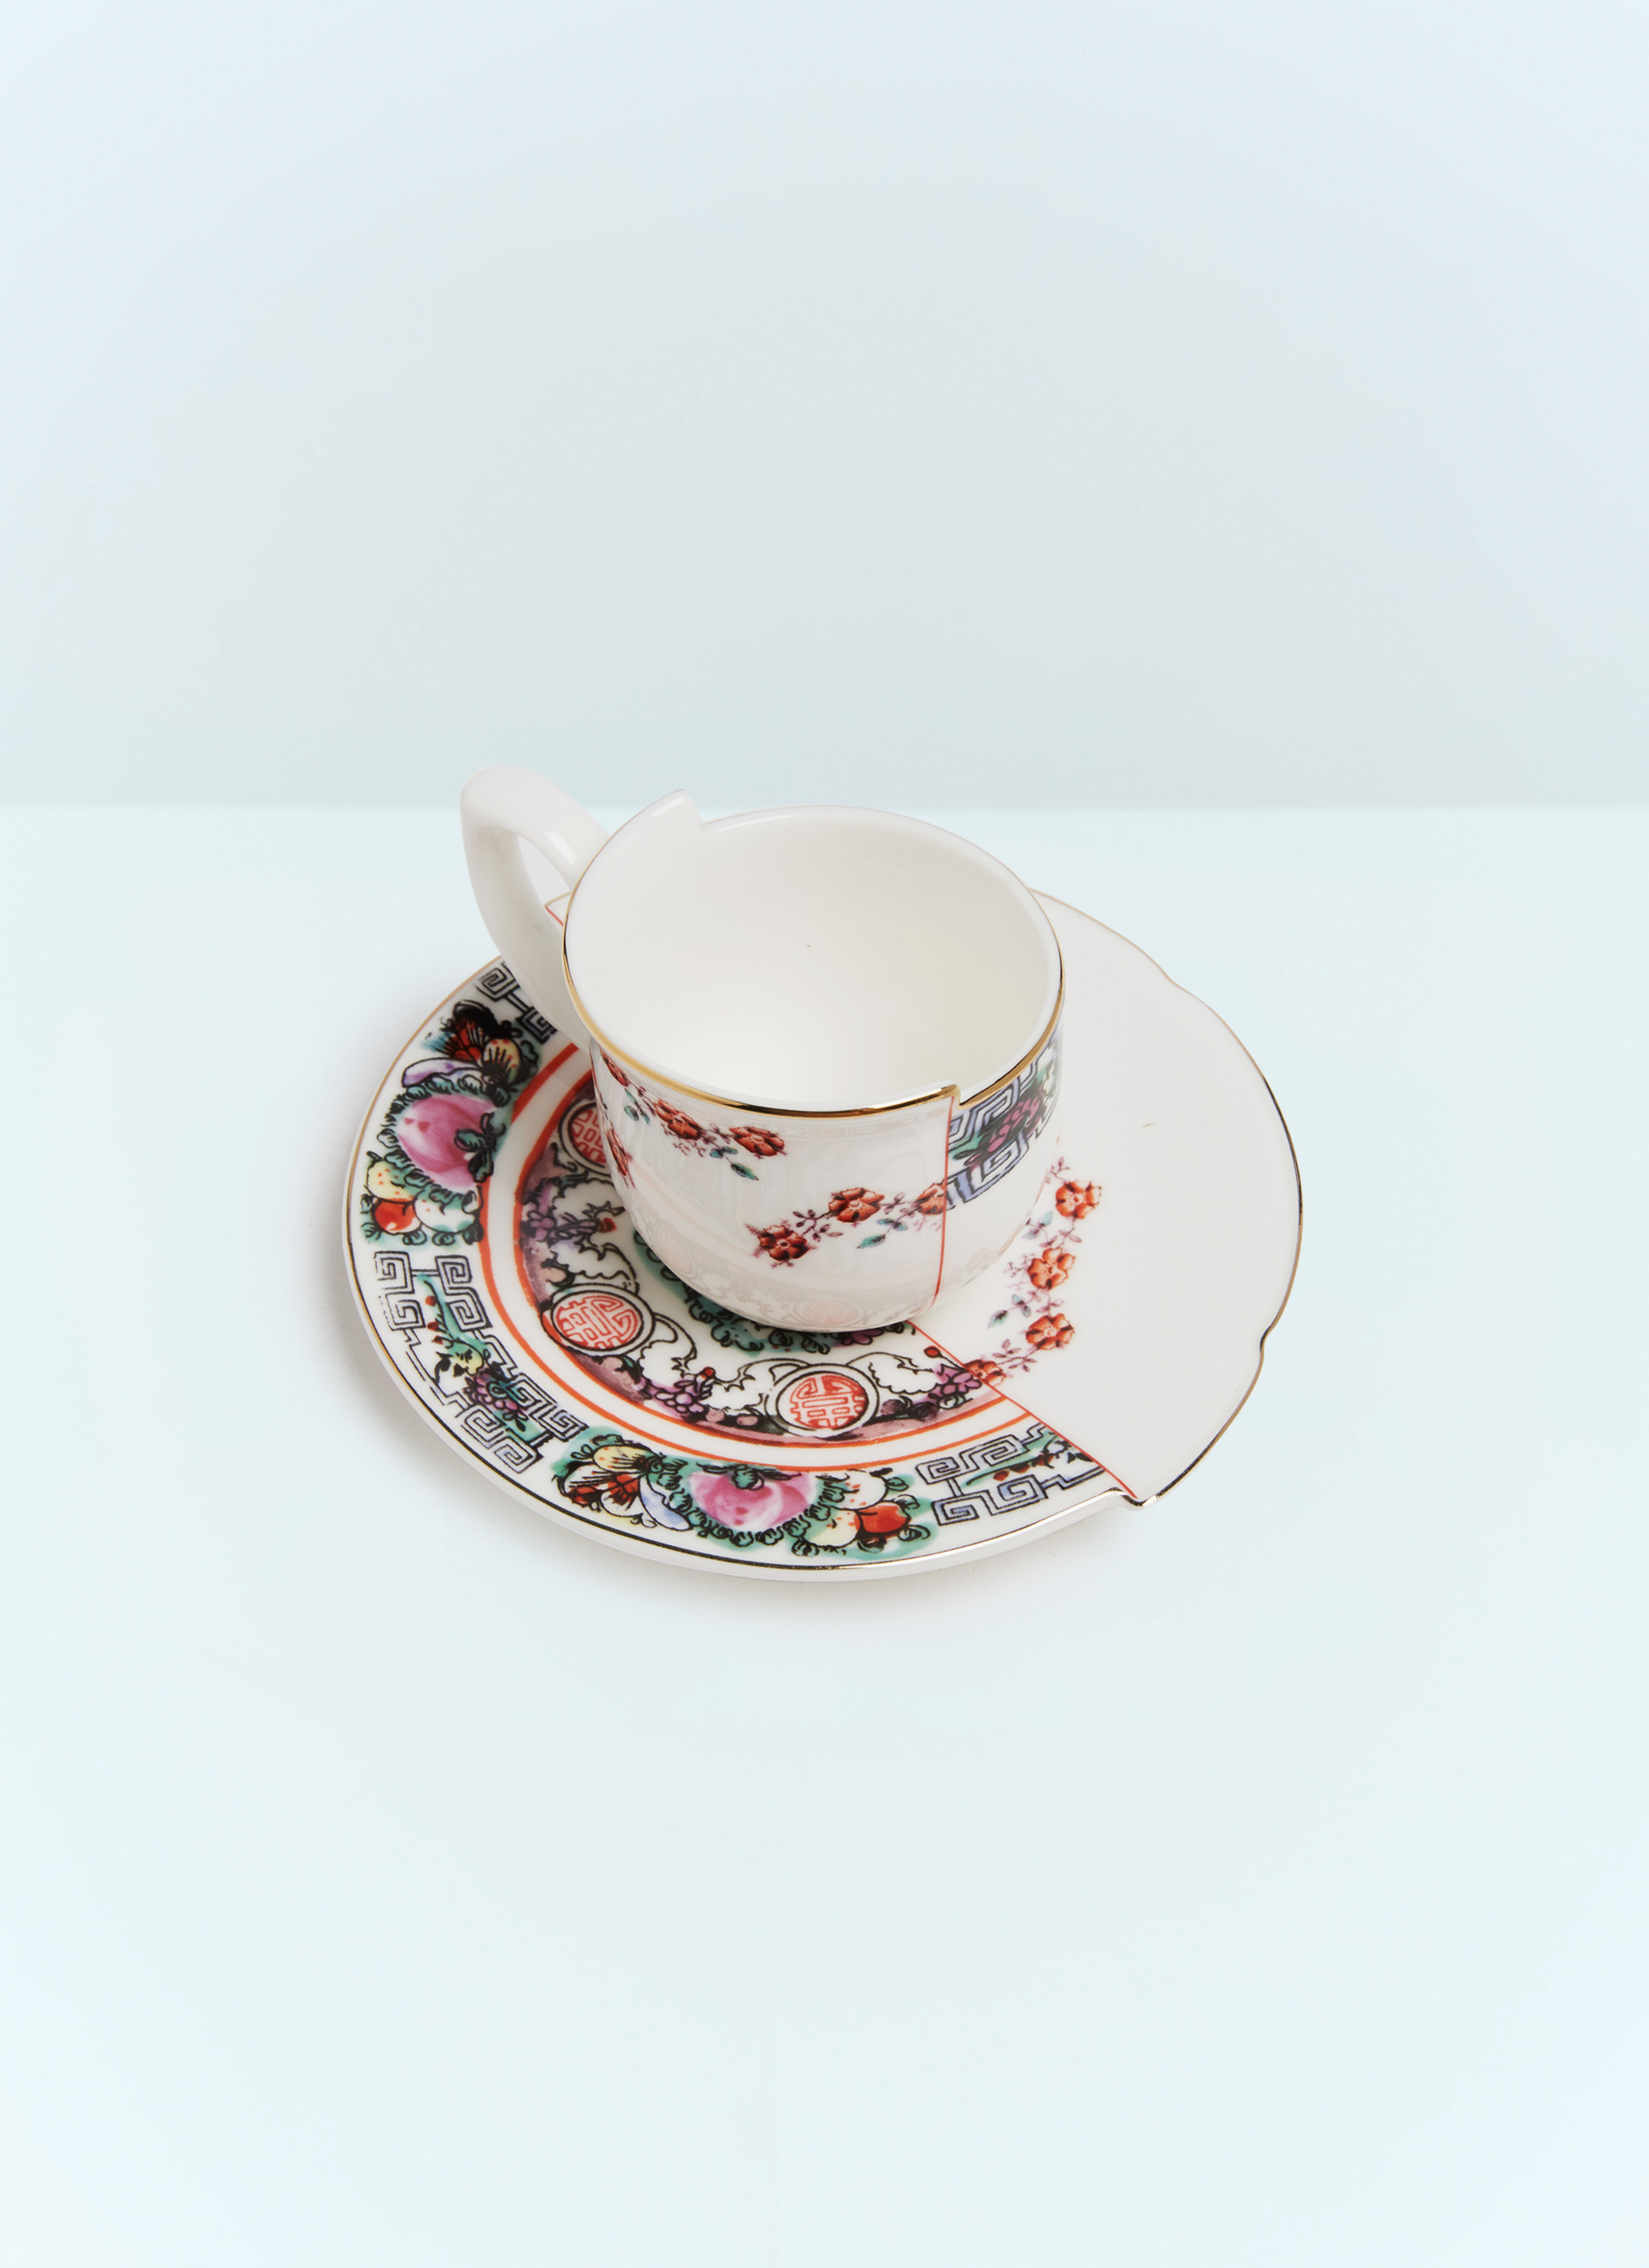 Polspotten Hybrid Tamara Coffee Cup With Saucer Multicolour wps0691145